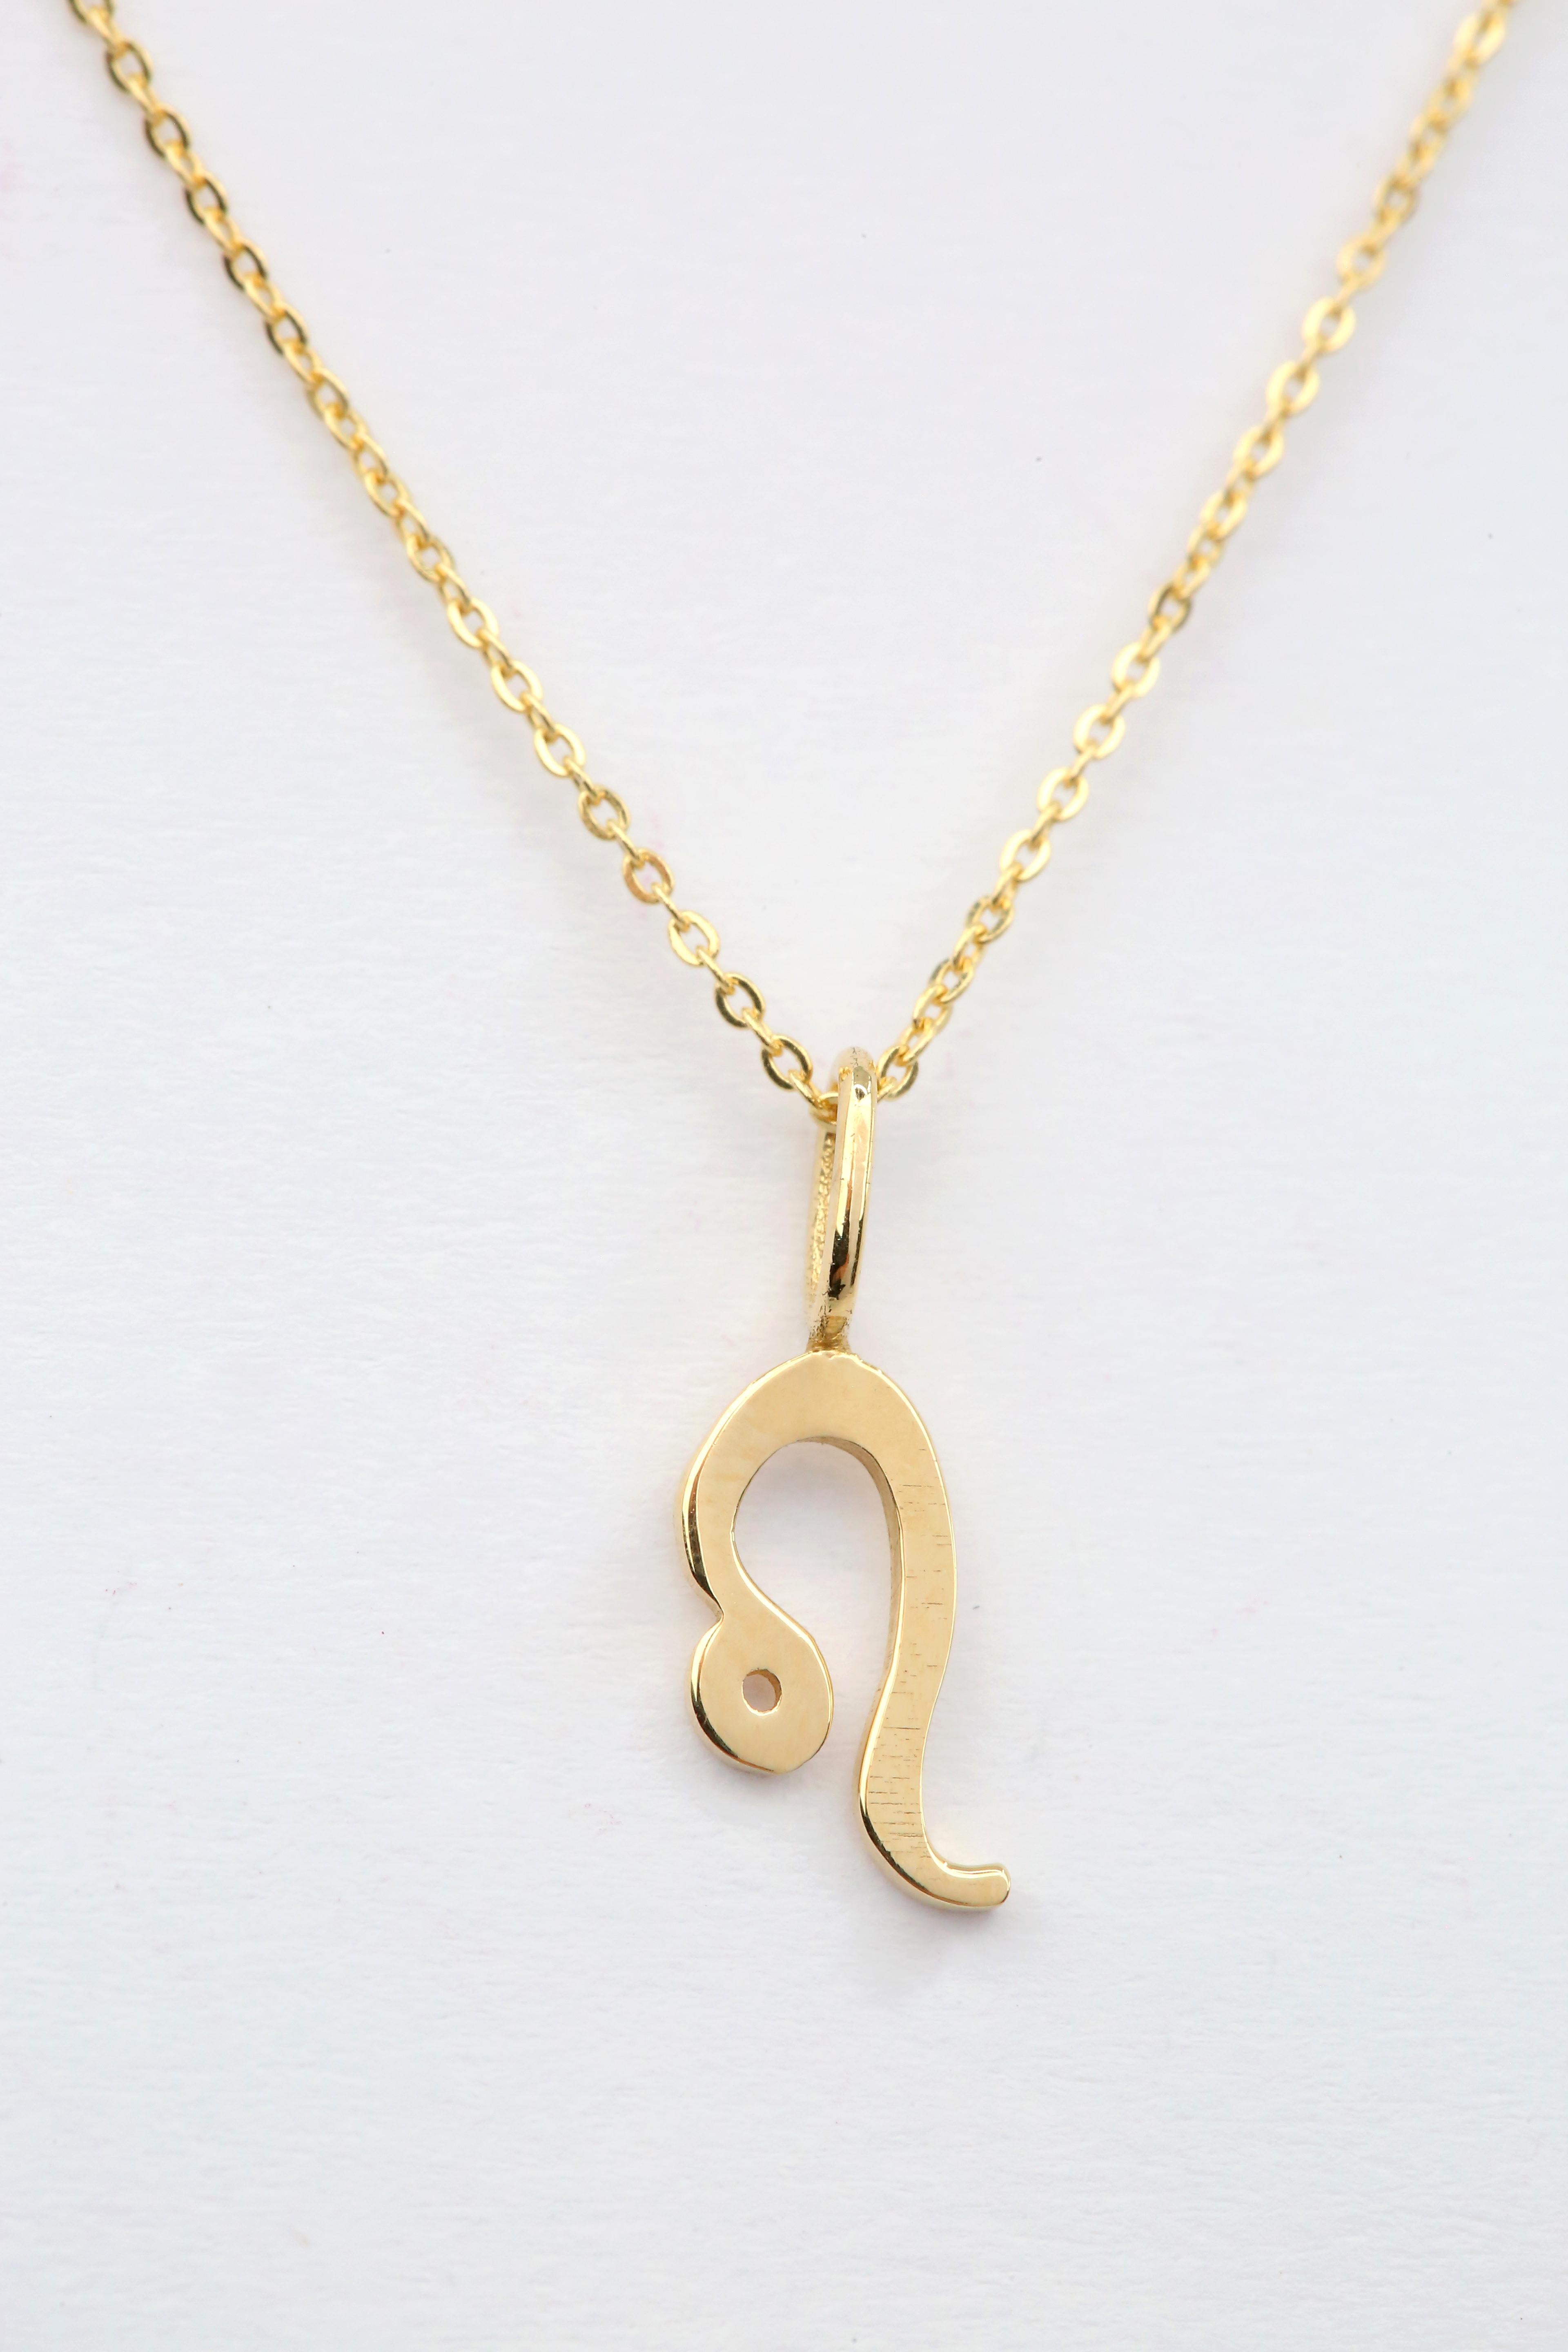 14K Gold Necklace Leo Sign Symbol Zodiac Collection Necklace

*The product is the Leo Zodiac Symbol.

It’s a manual labour product. ‘Handmade’. Fashionable product. 

This necklace was made with quality materials and excellent handwork. I guarantee 